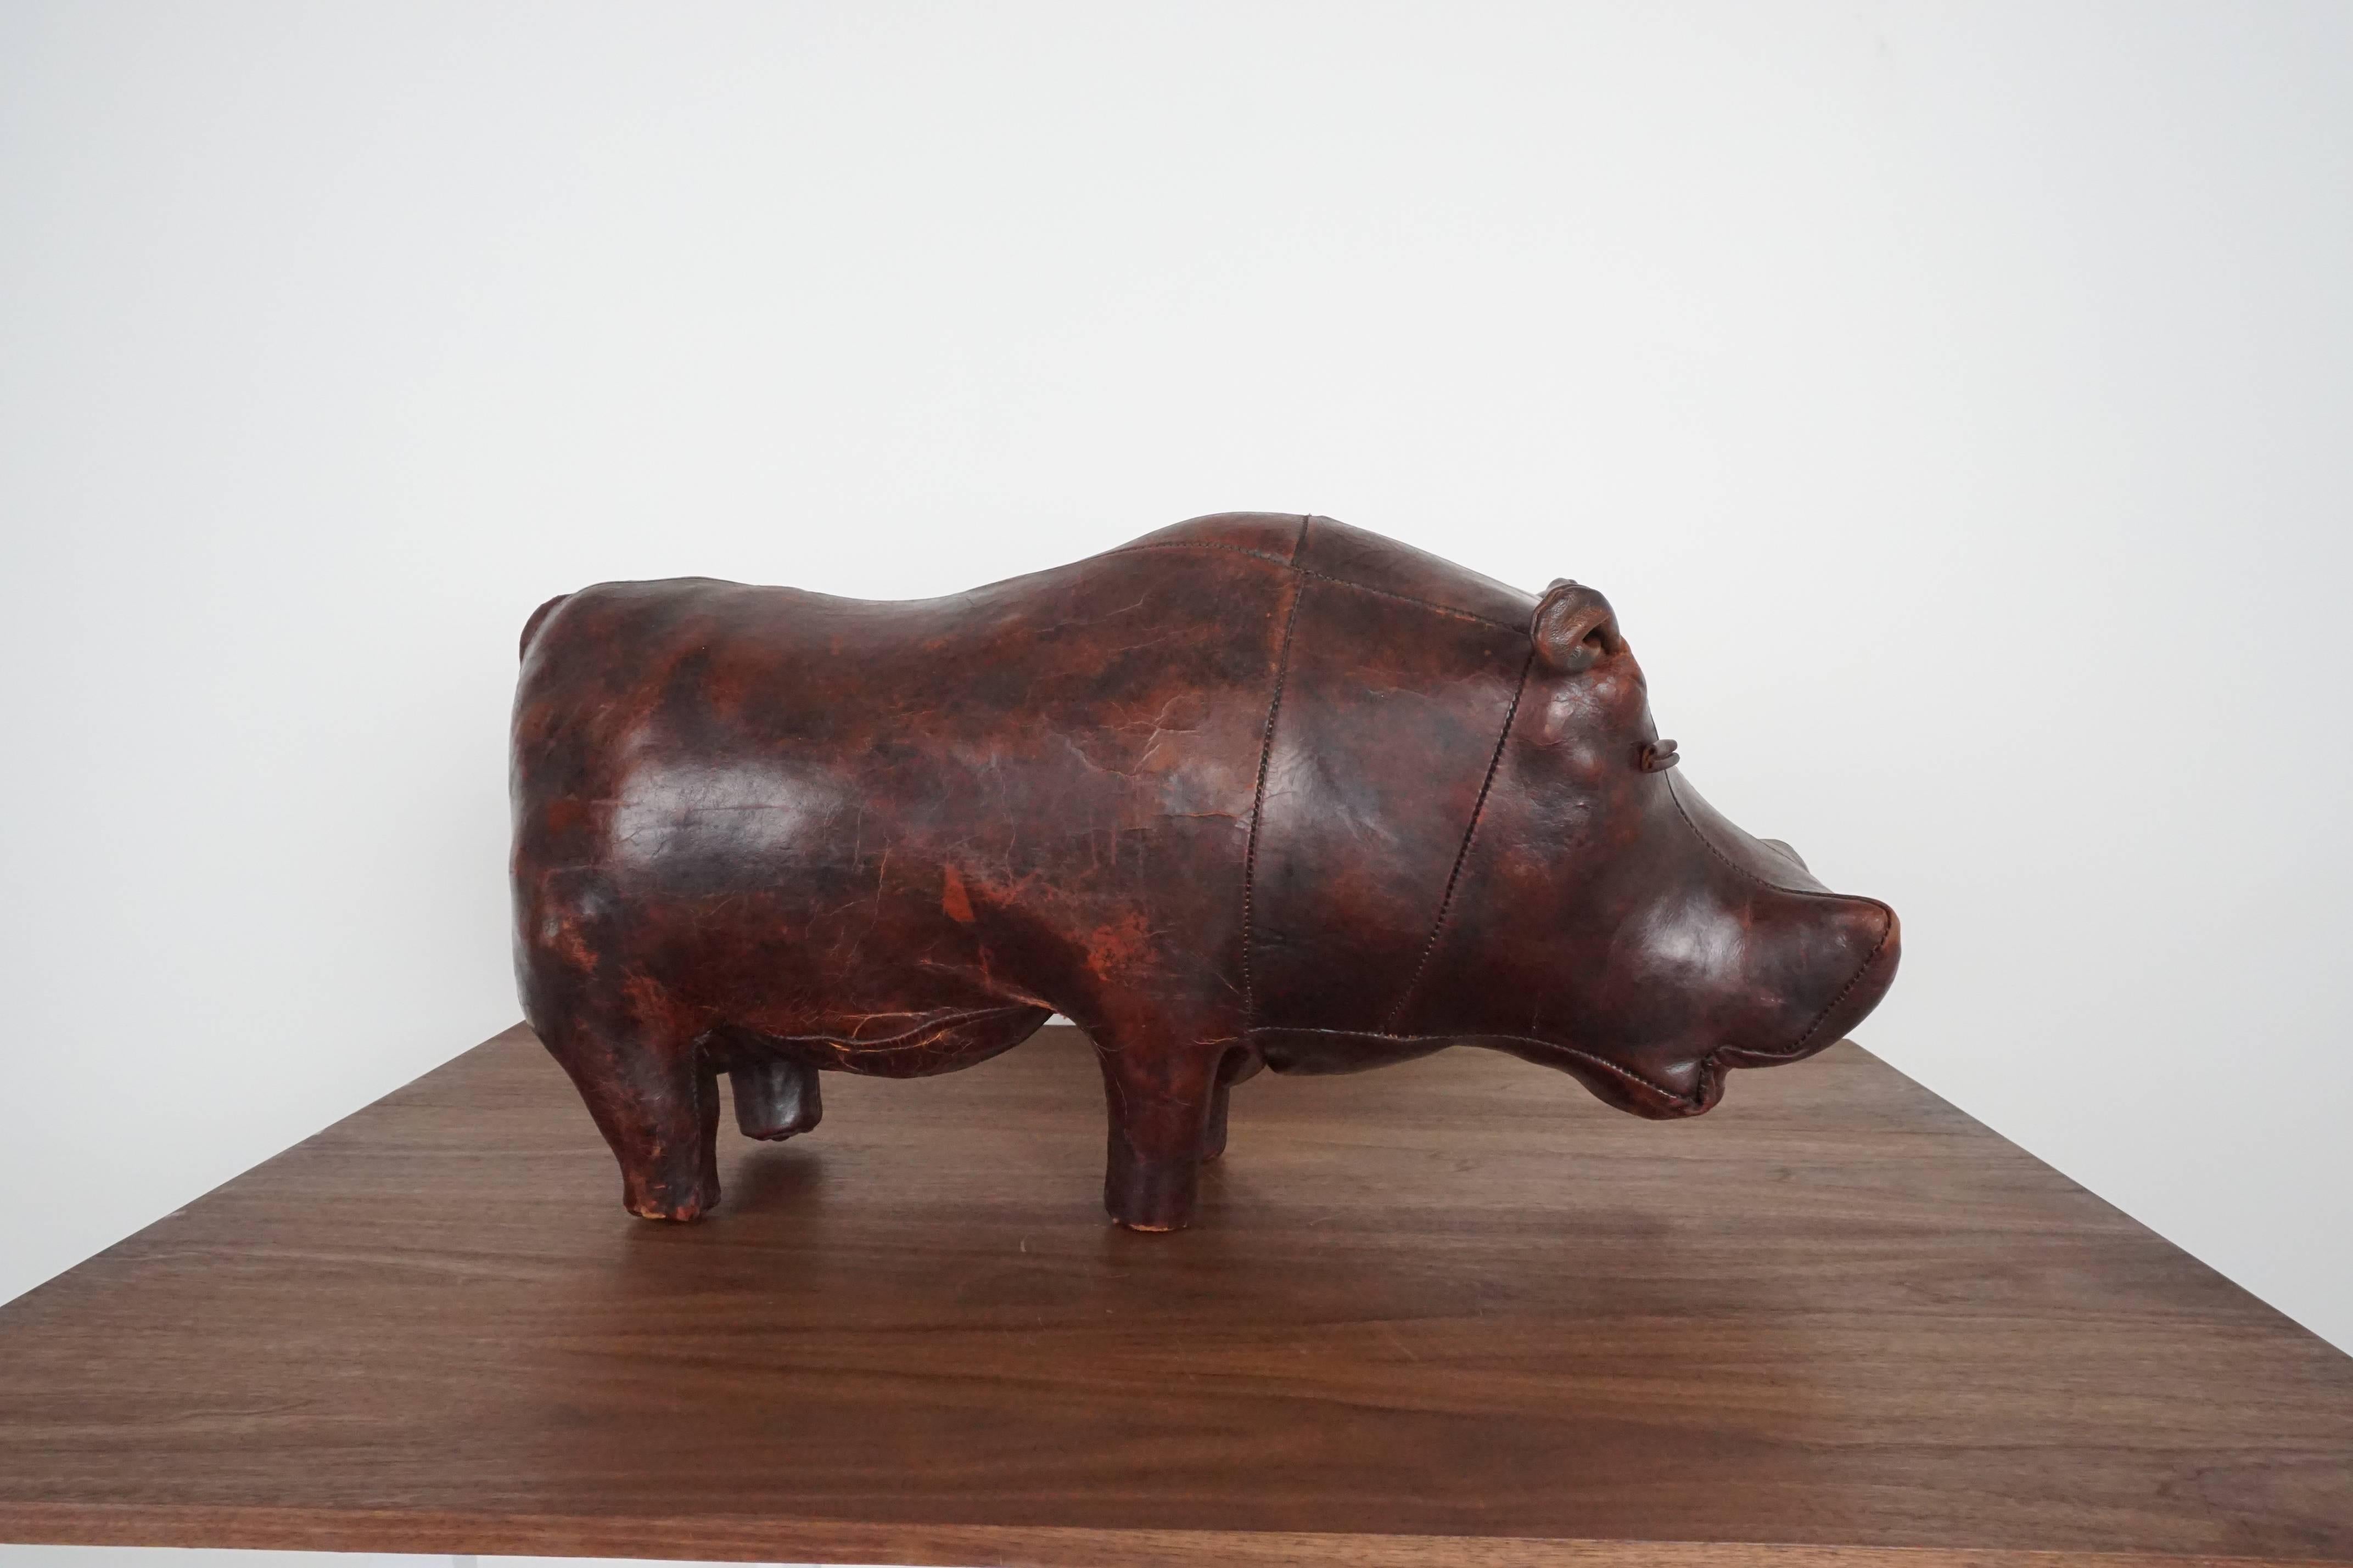 Large hippopotamus designed by Dimitri Omersa for Abercrombie & Fitch as a store display in the 1960s. Great patina to leather animal made by Omersa and hippo happens to be really cute!